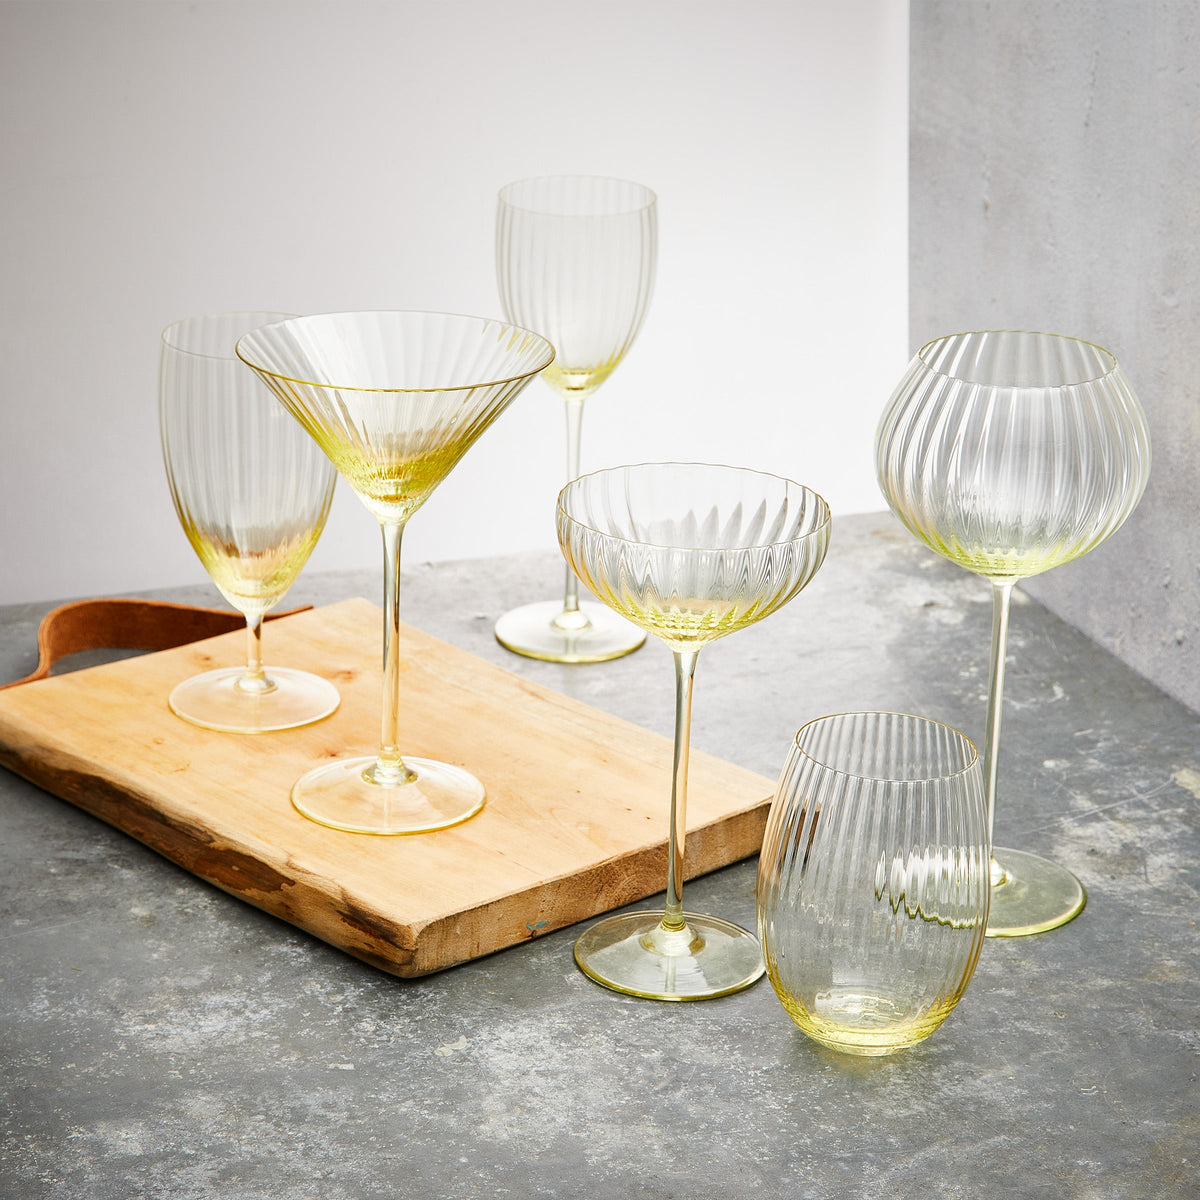 Quinn Citrine Yellow Mouth-blown Crystal Everyday Glasses from Caskata.